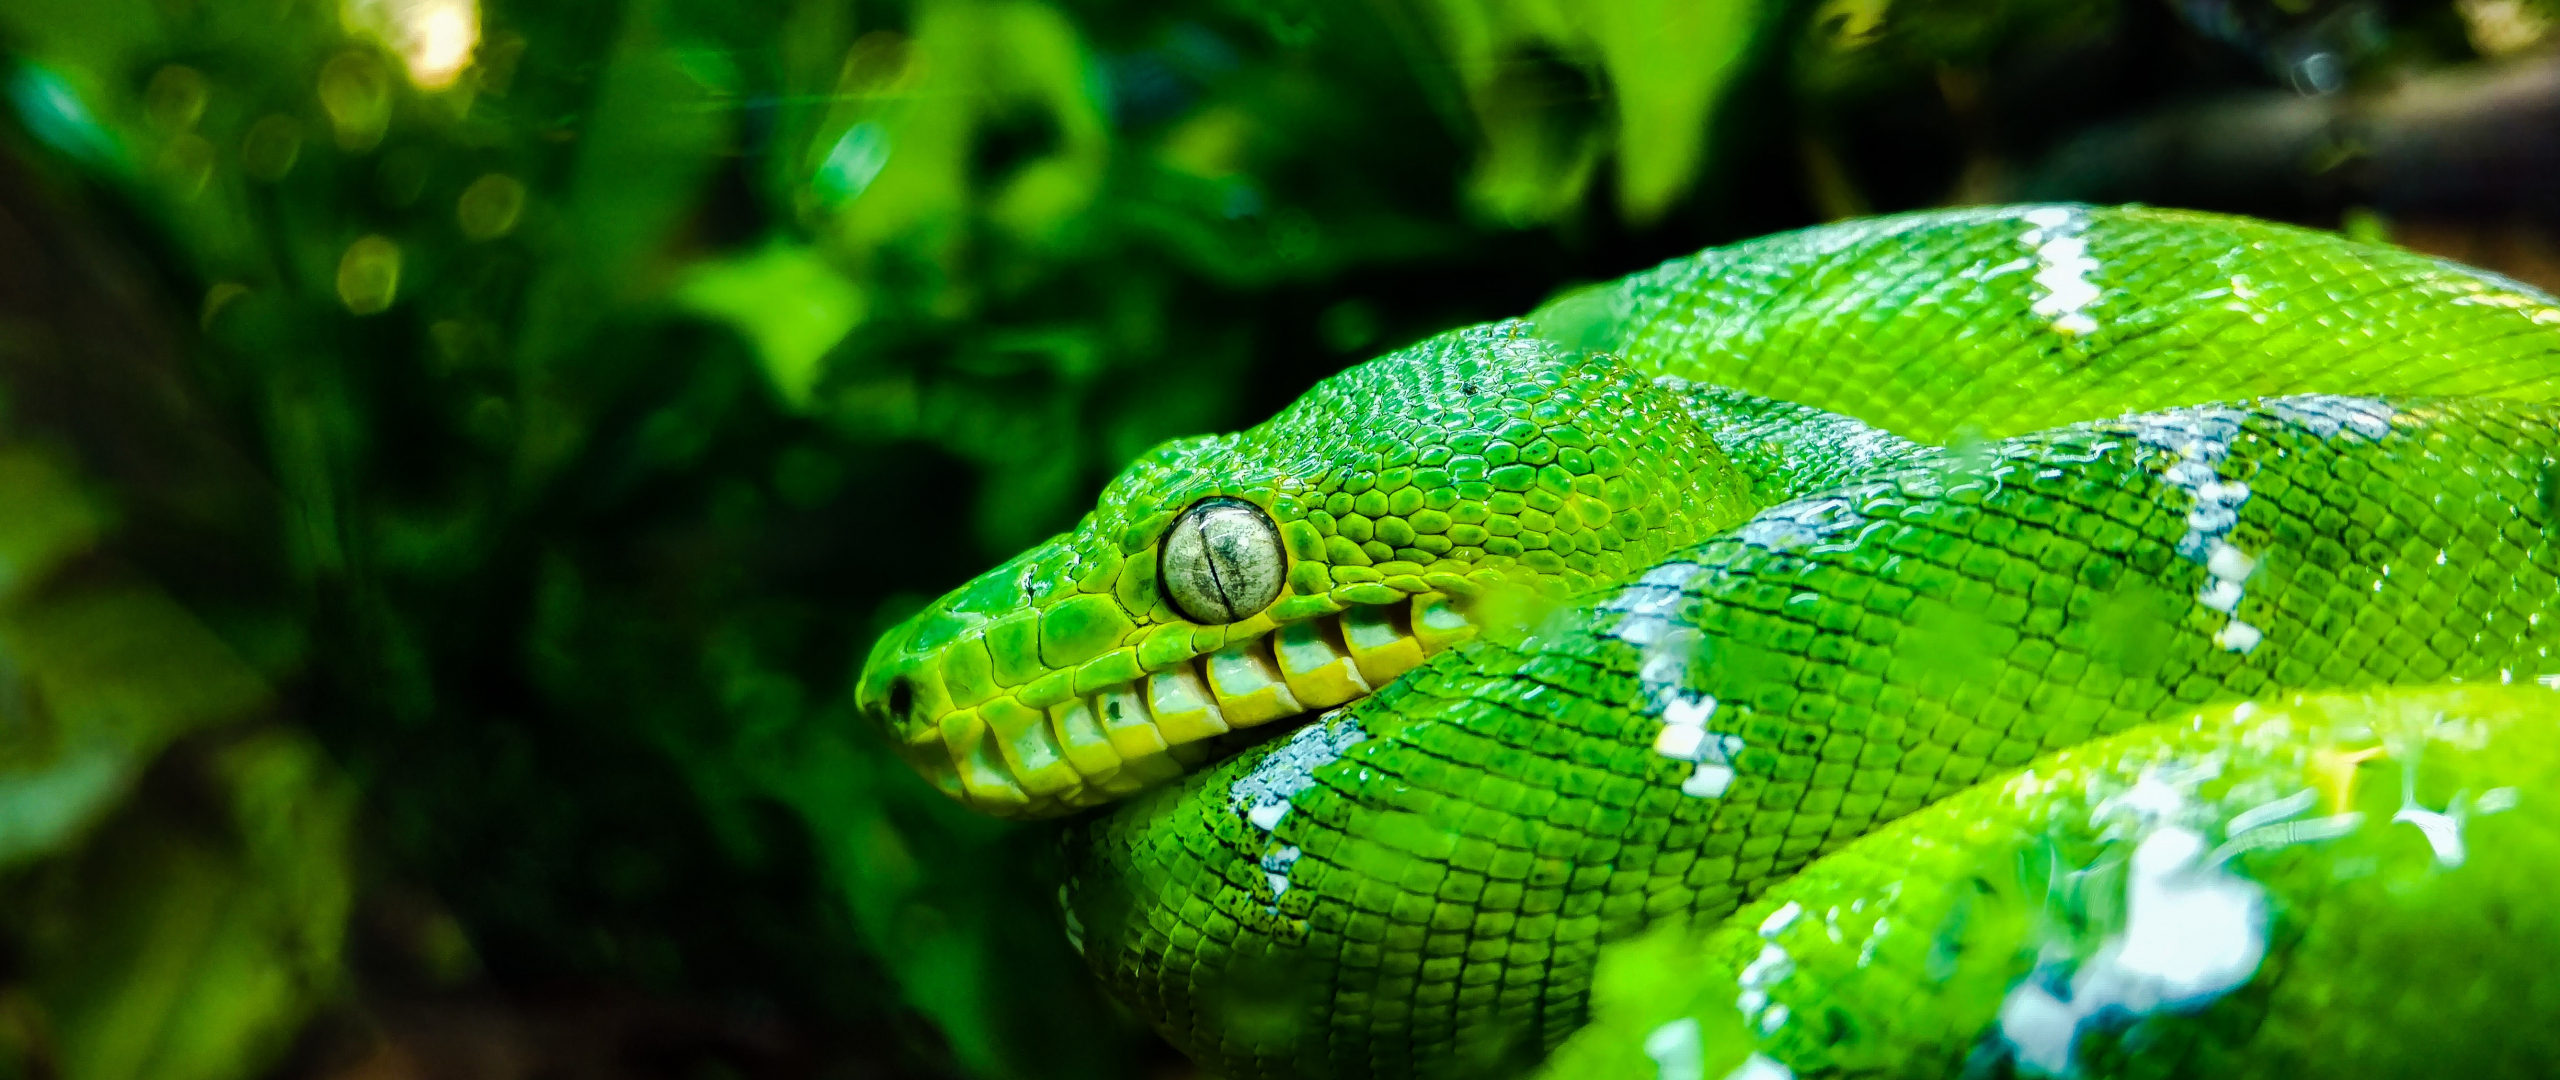 Desktop Wallpaper Green Python, Snake, Reptile, HD Image, Picture, Background, Y4s Qi